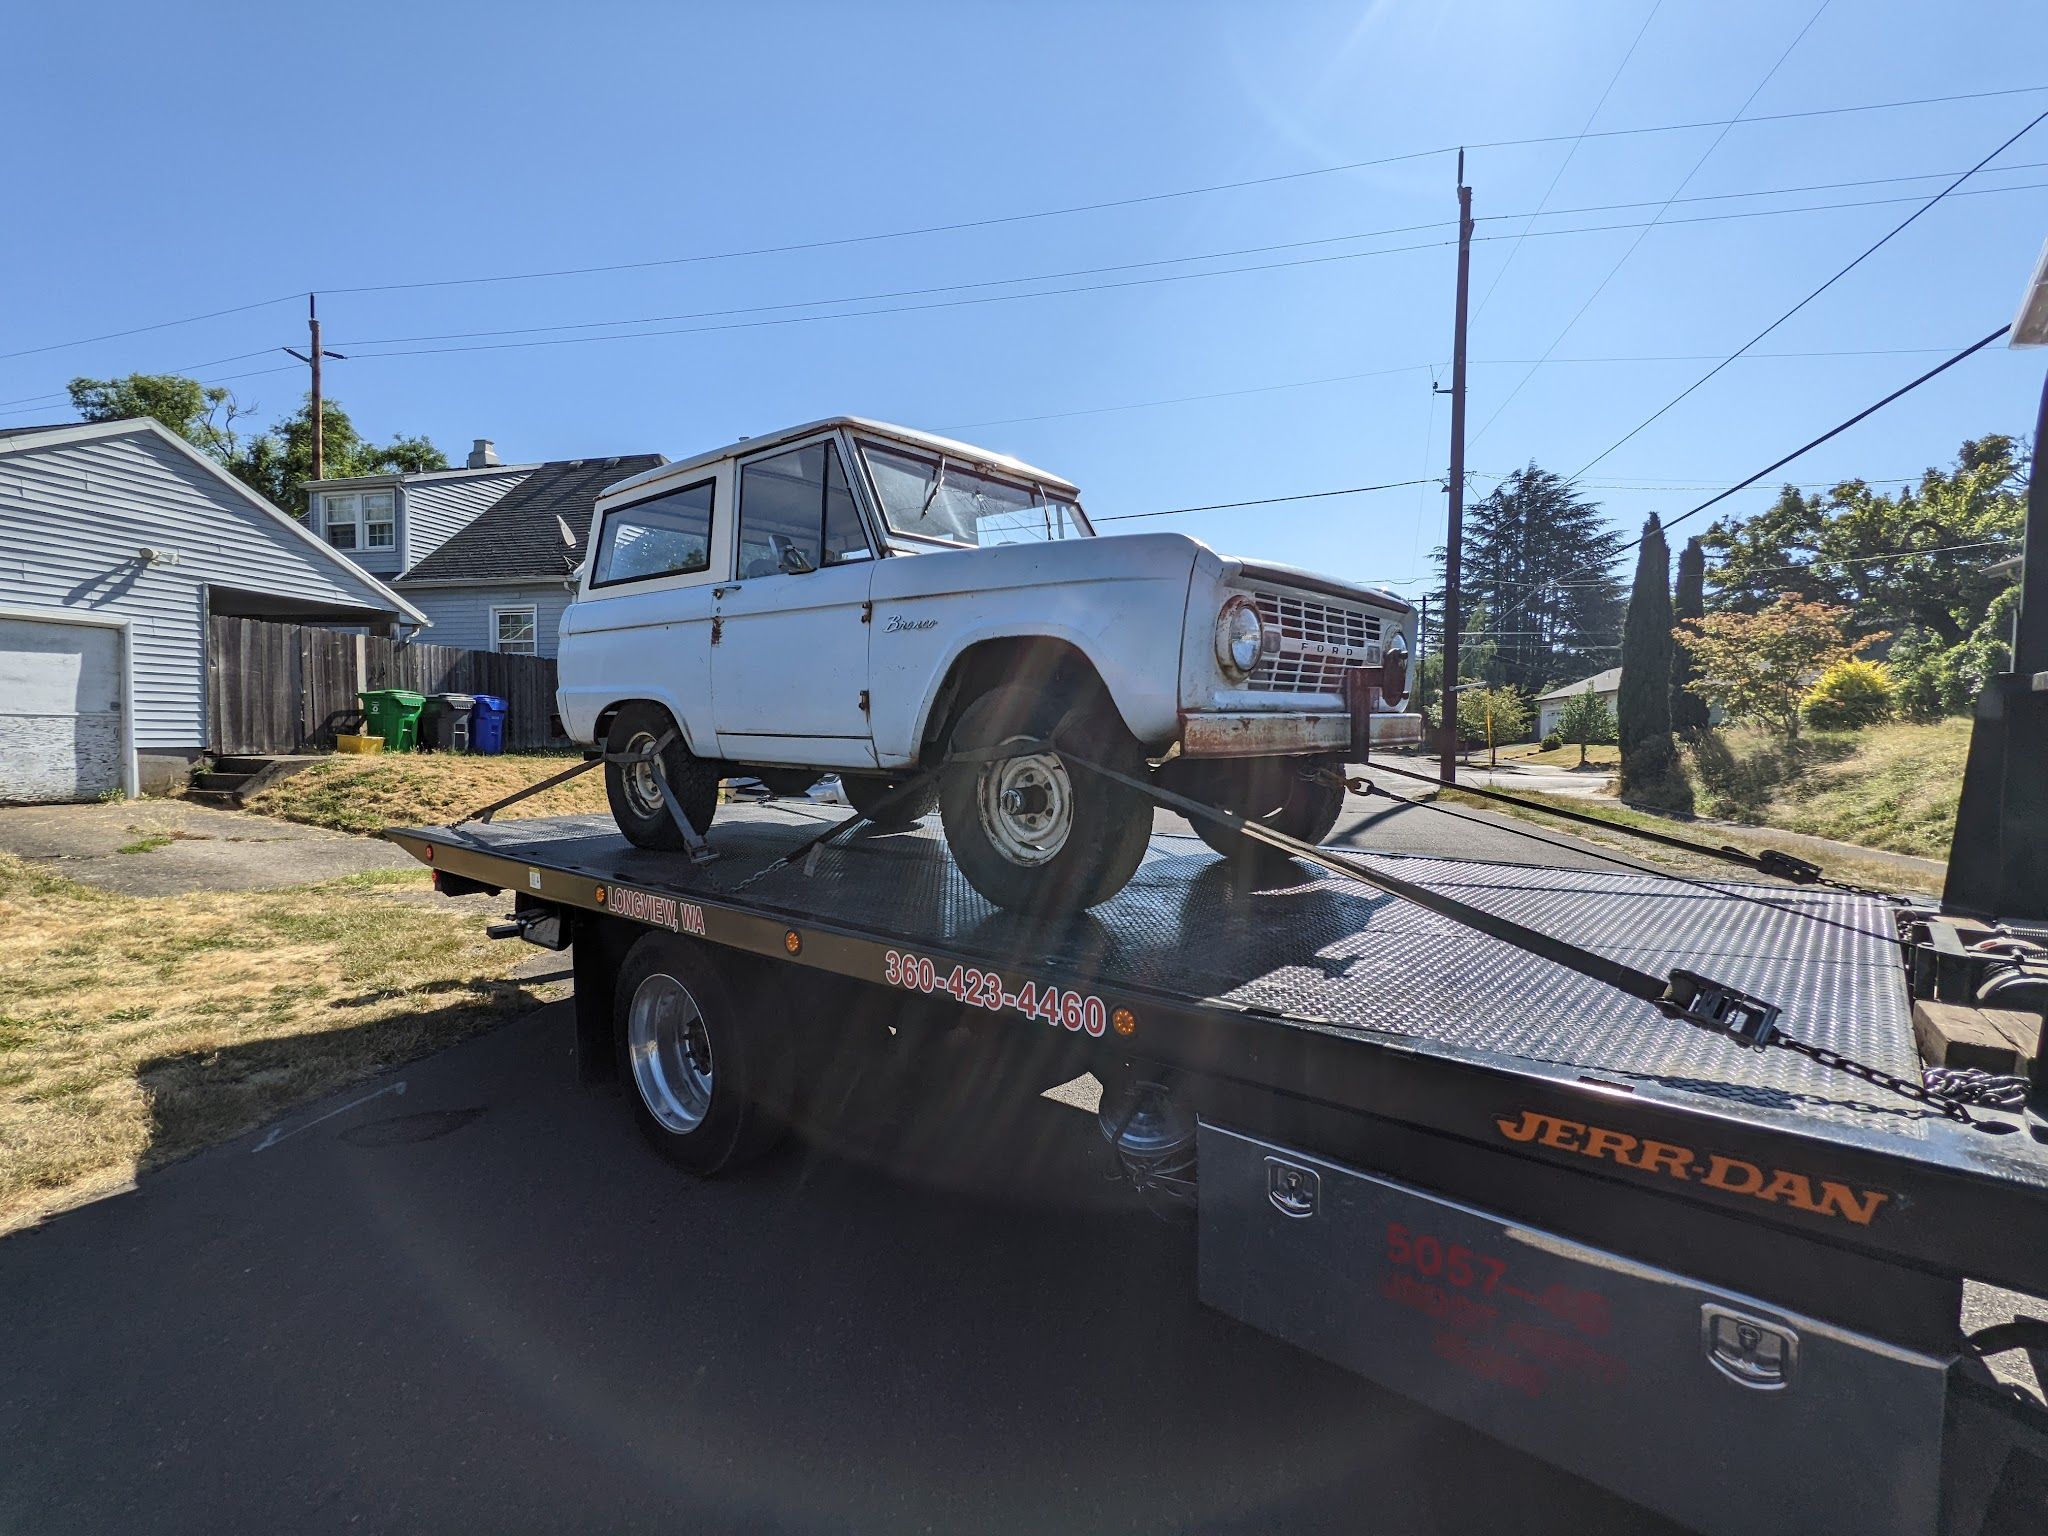 Services & Products Carl's Towing and Repair in Longview WA